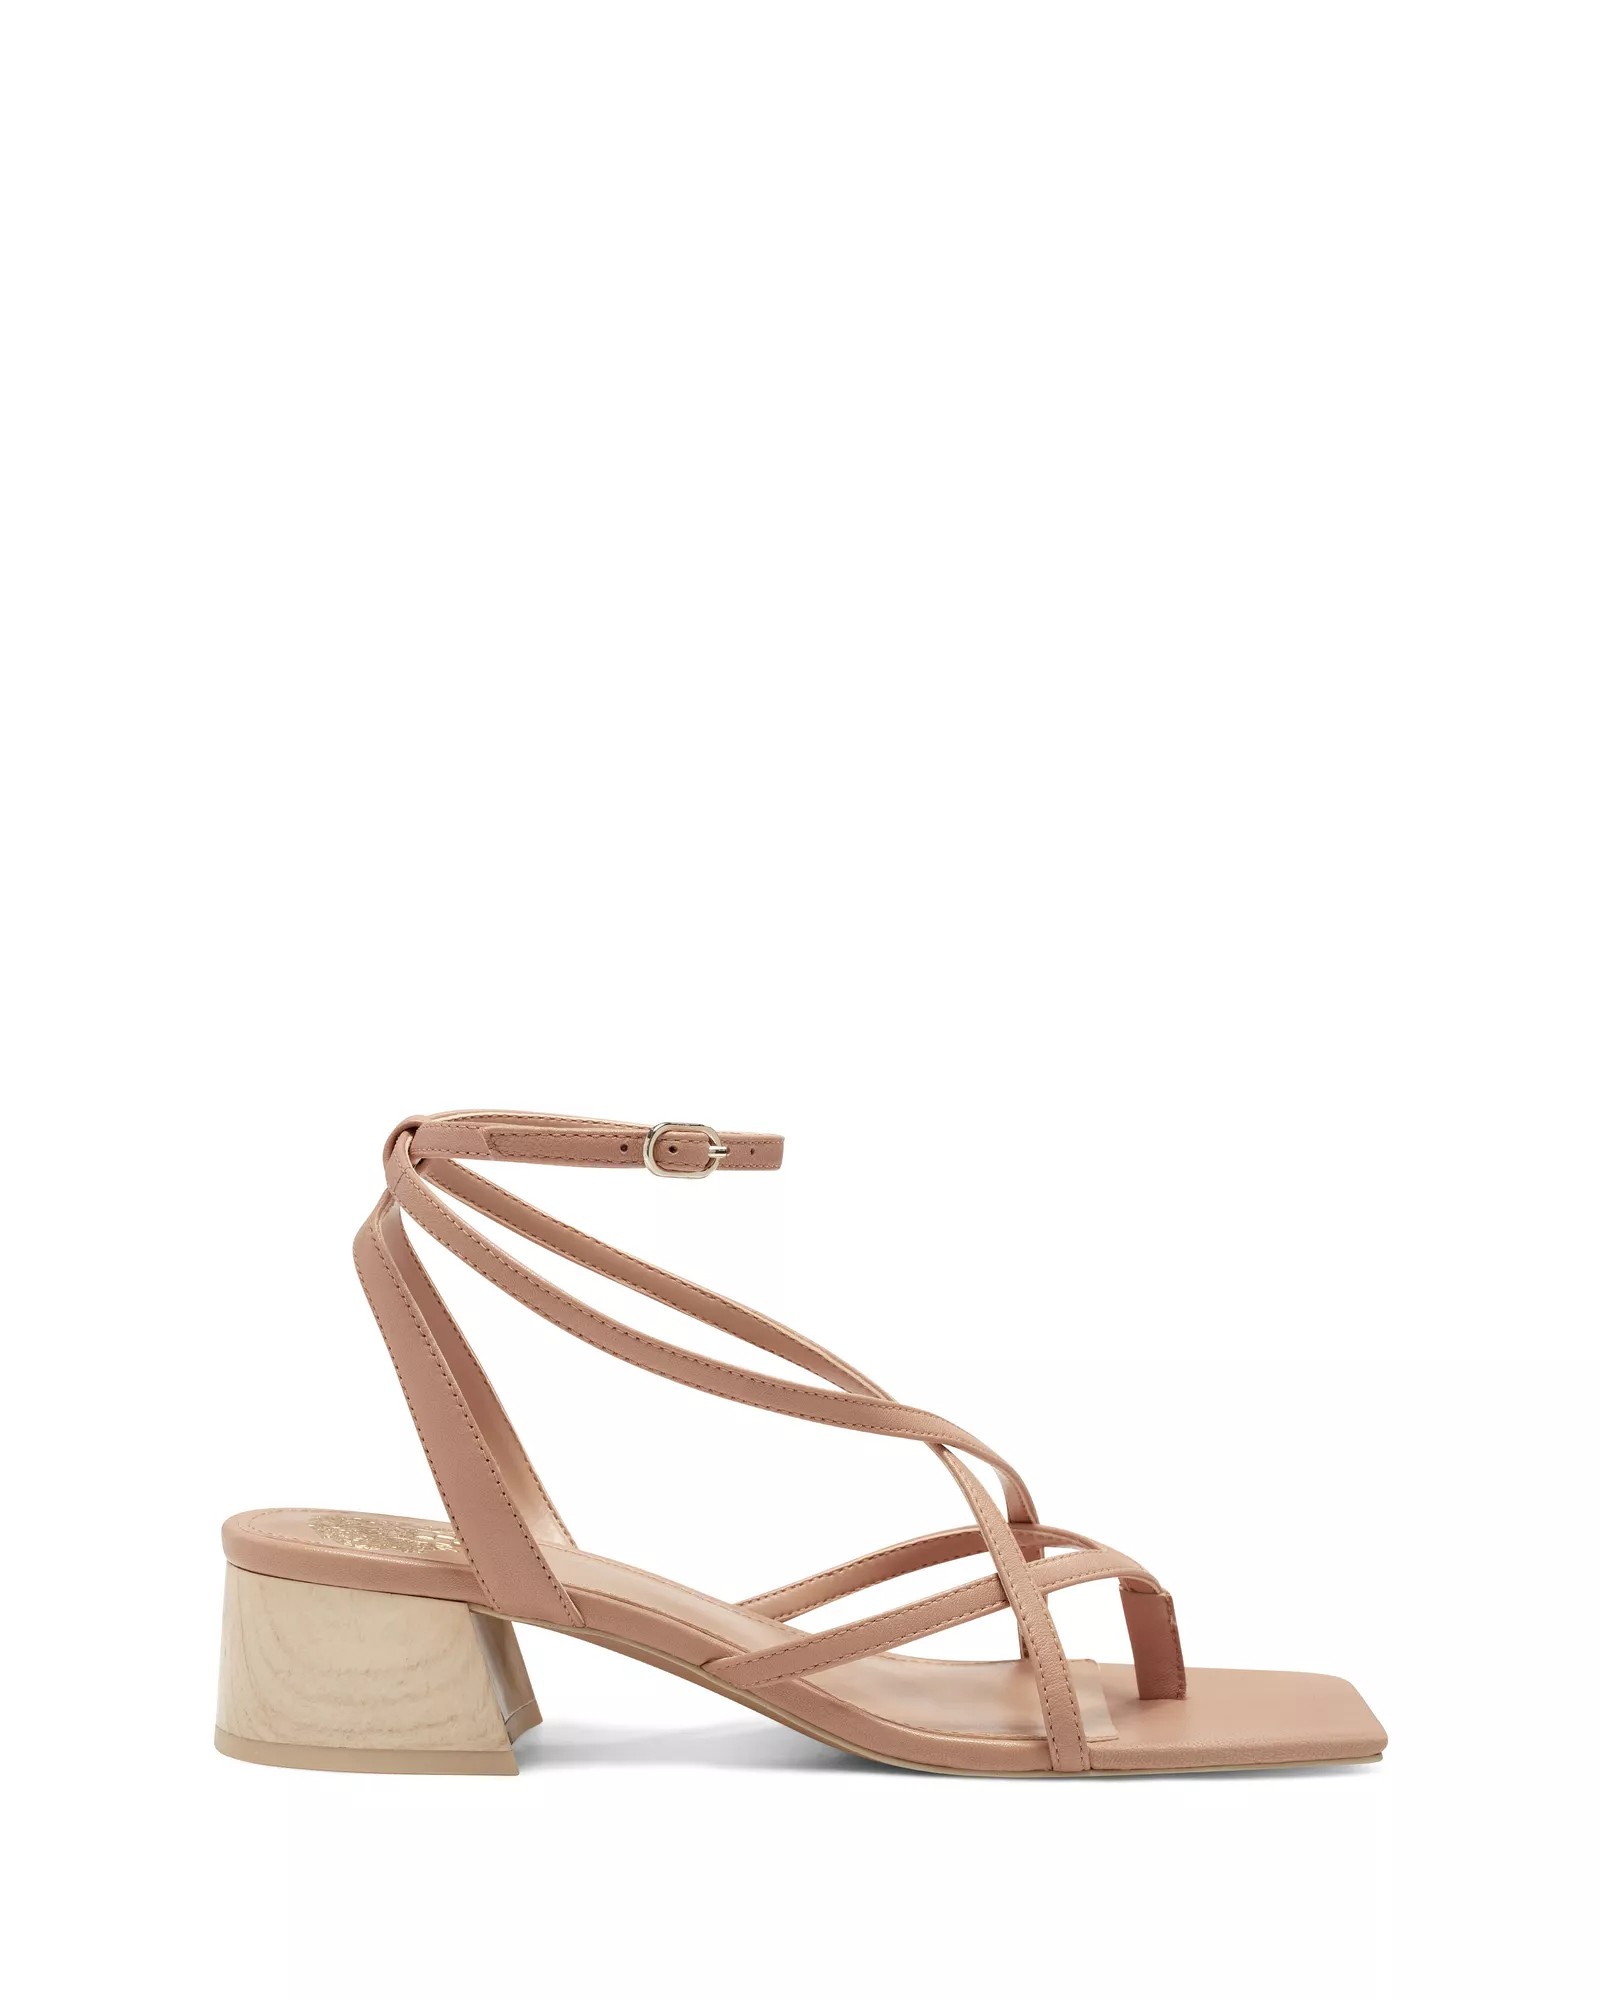 In These Shoes: Vince Camuto Toleo Sandals - Cheryl Shops